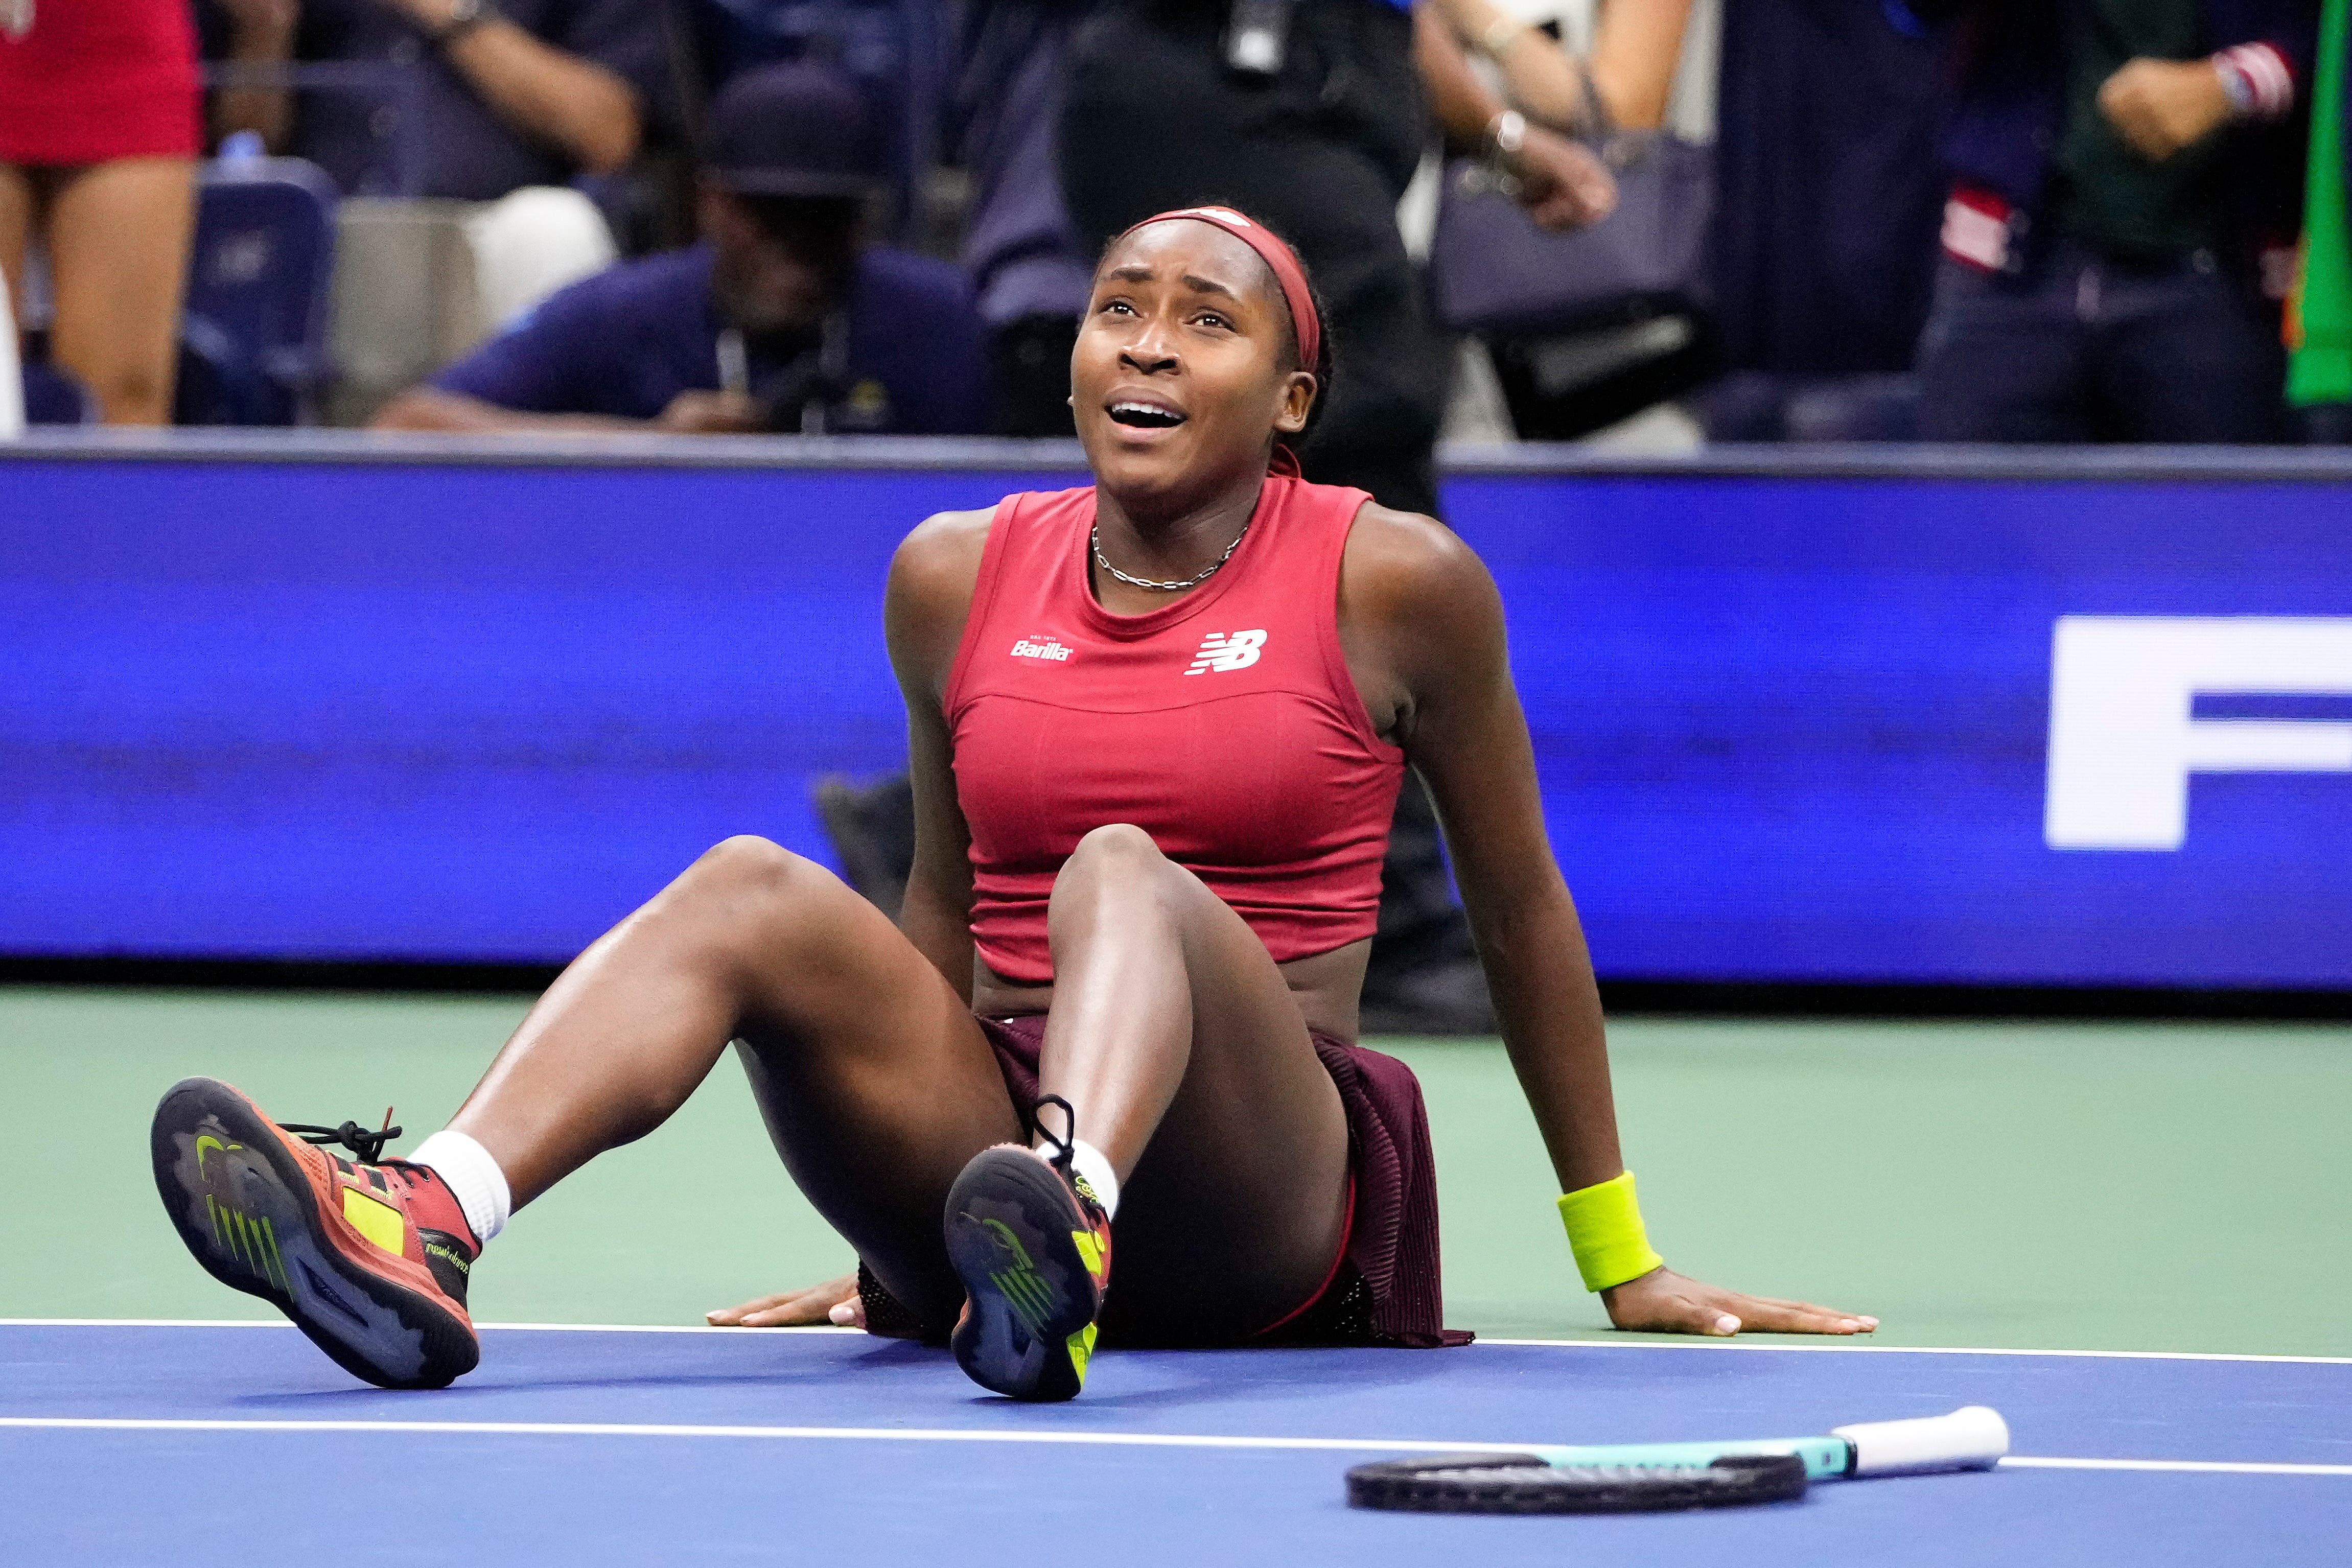 Teenage dream – Coco Gauff's rise to US Open champion | The Independent